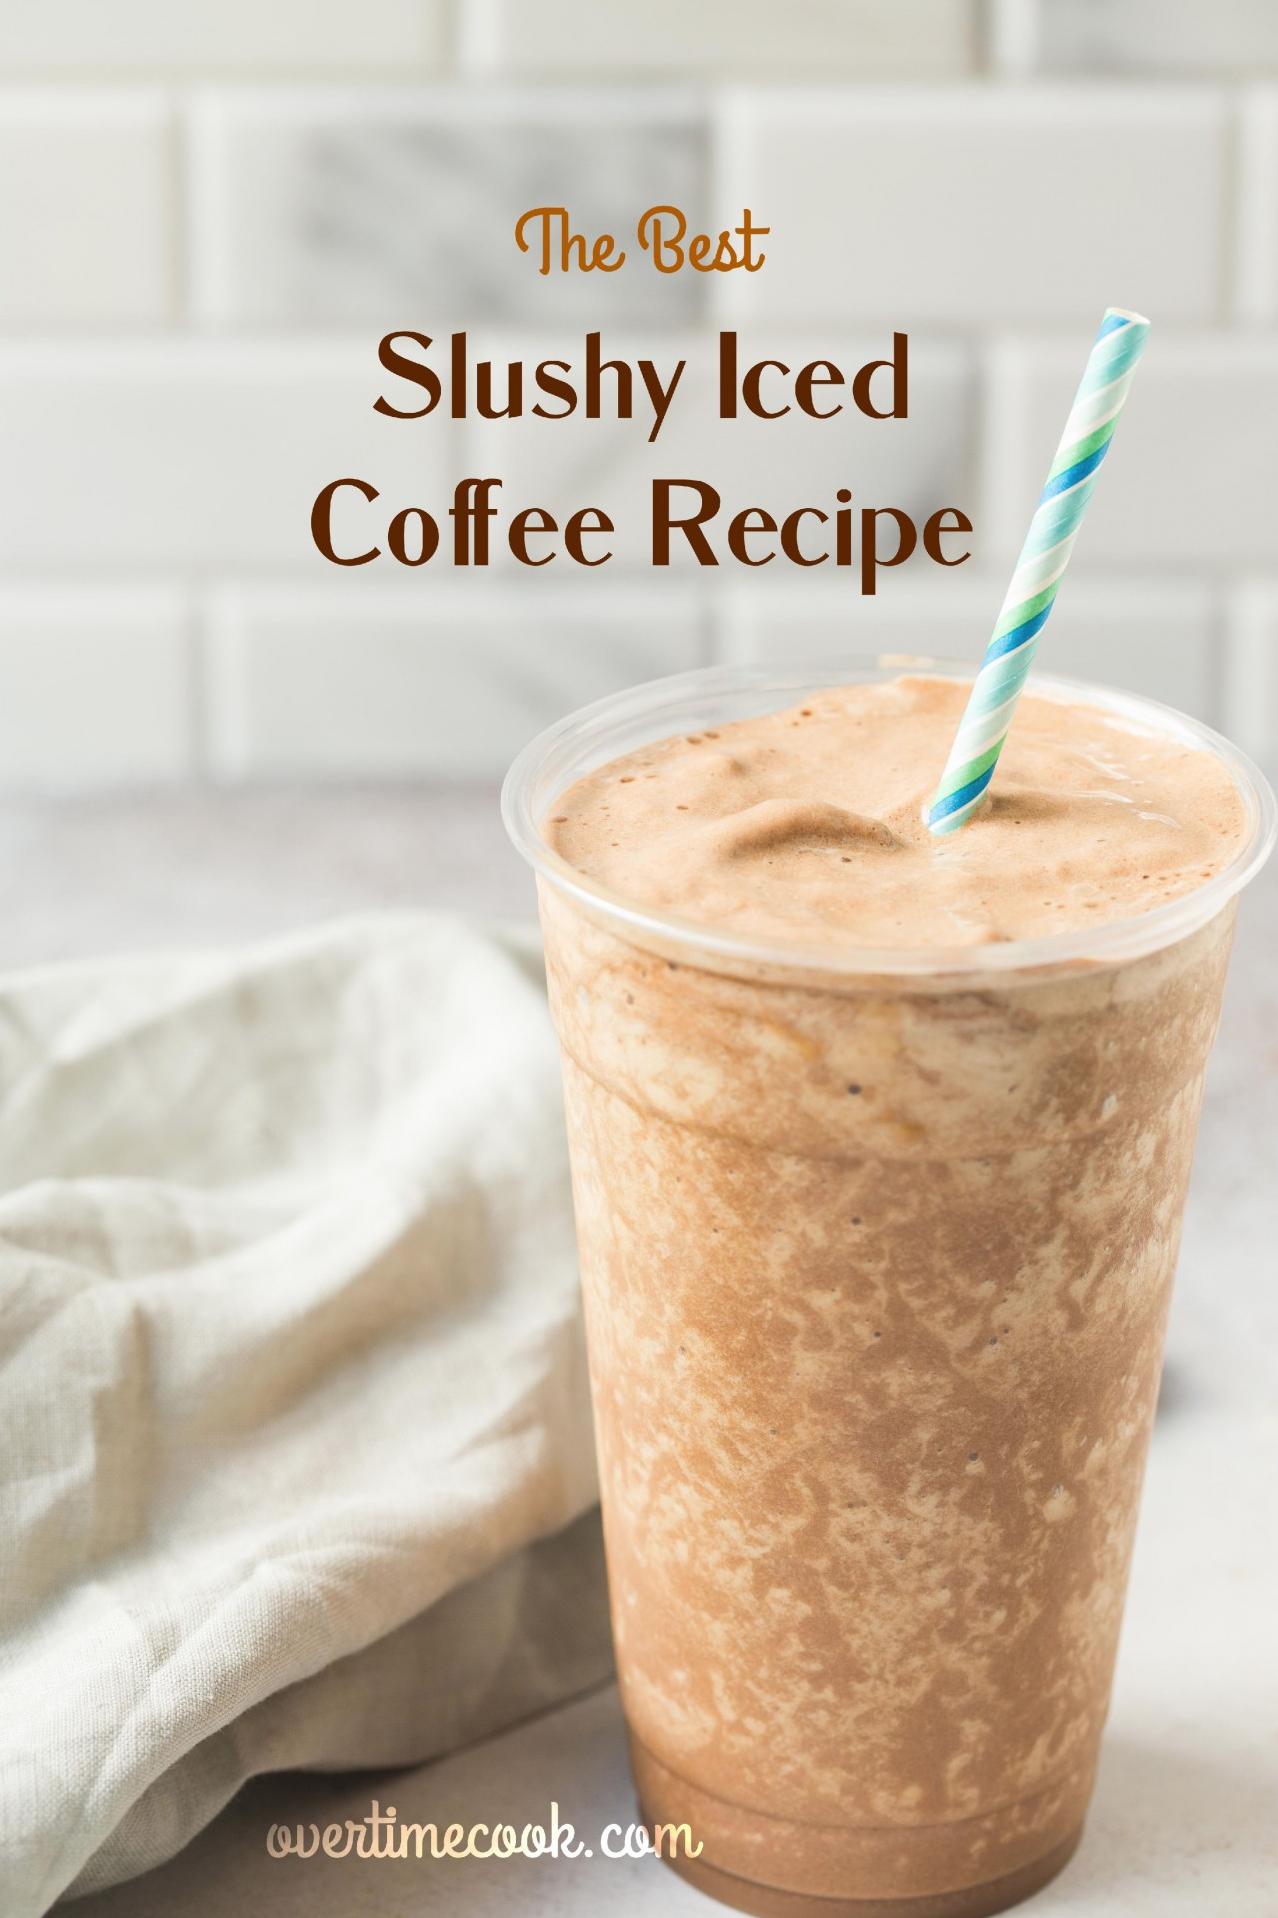  Our Iced Coffee Freeze is a must-try for coffee and ice cream lovers